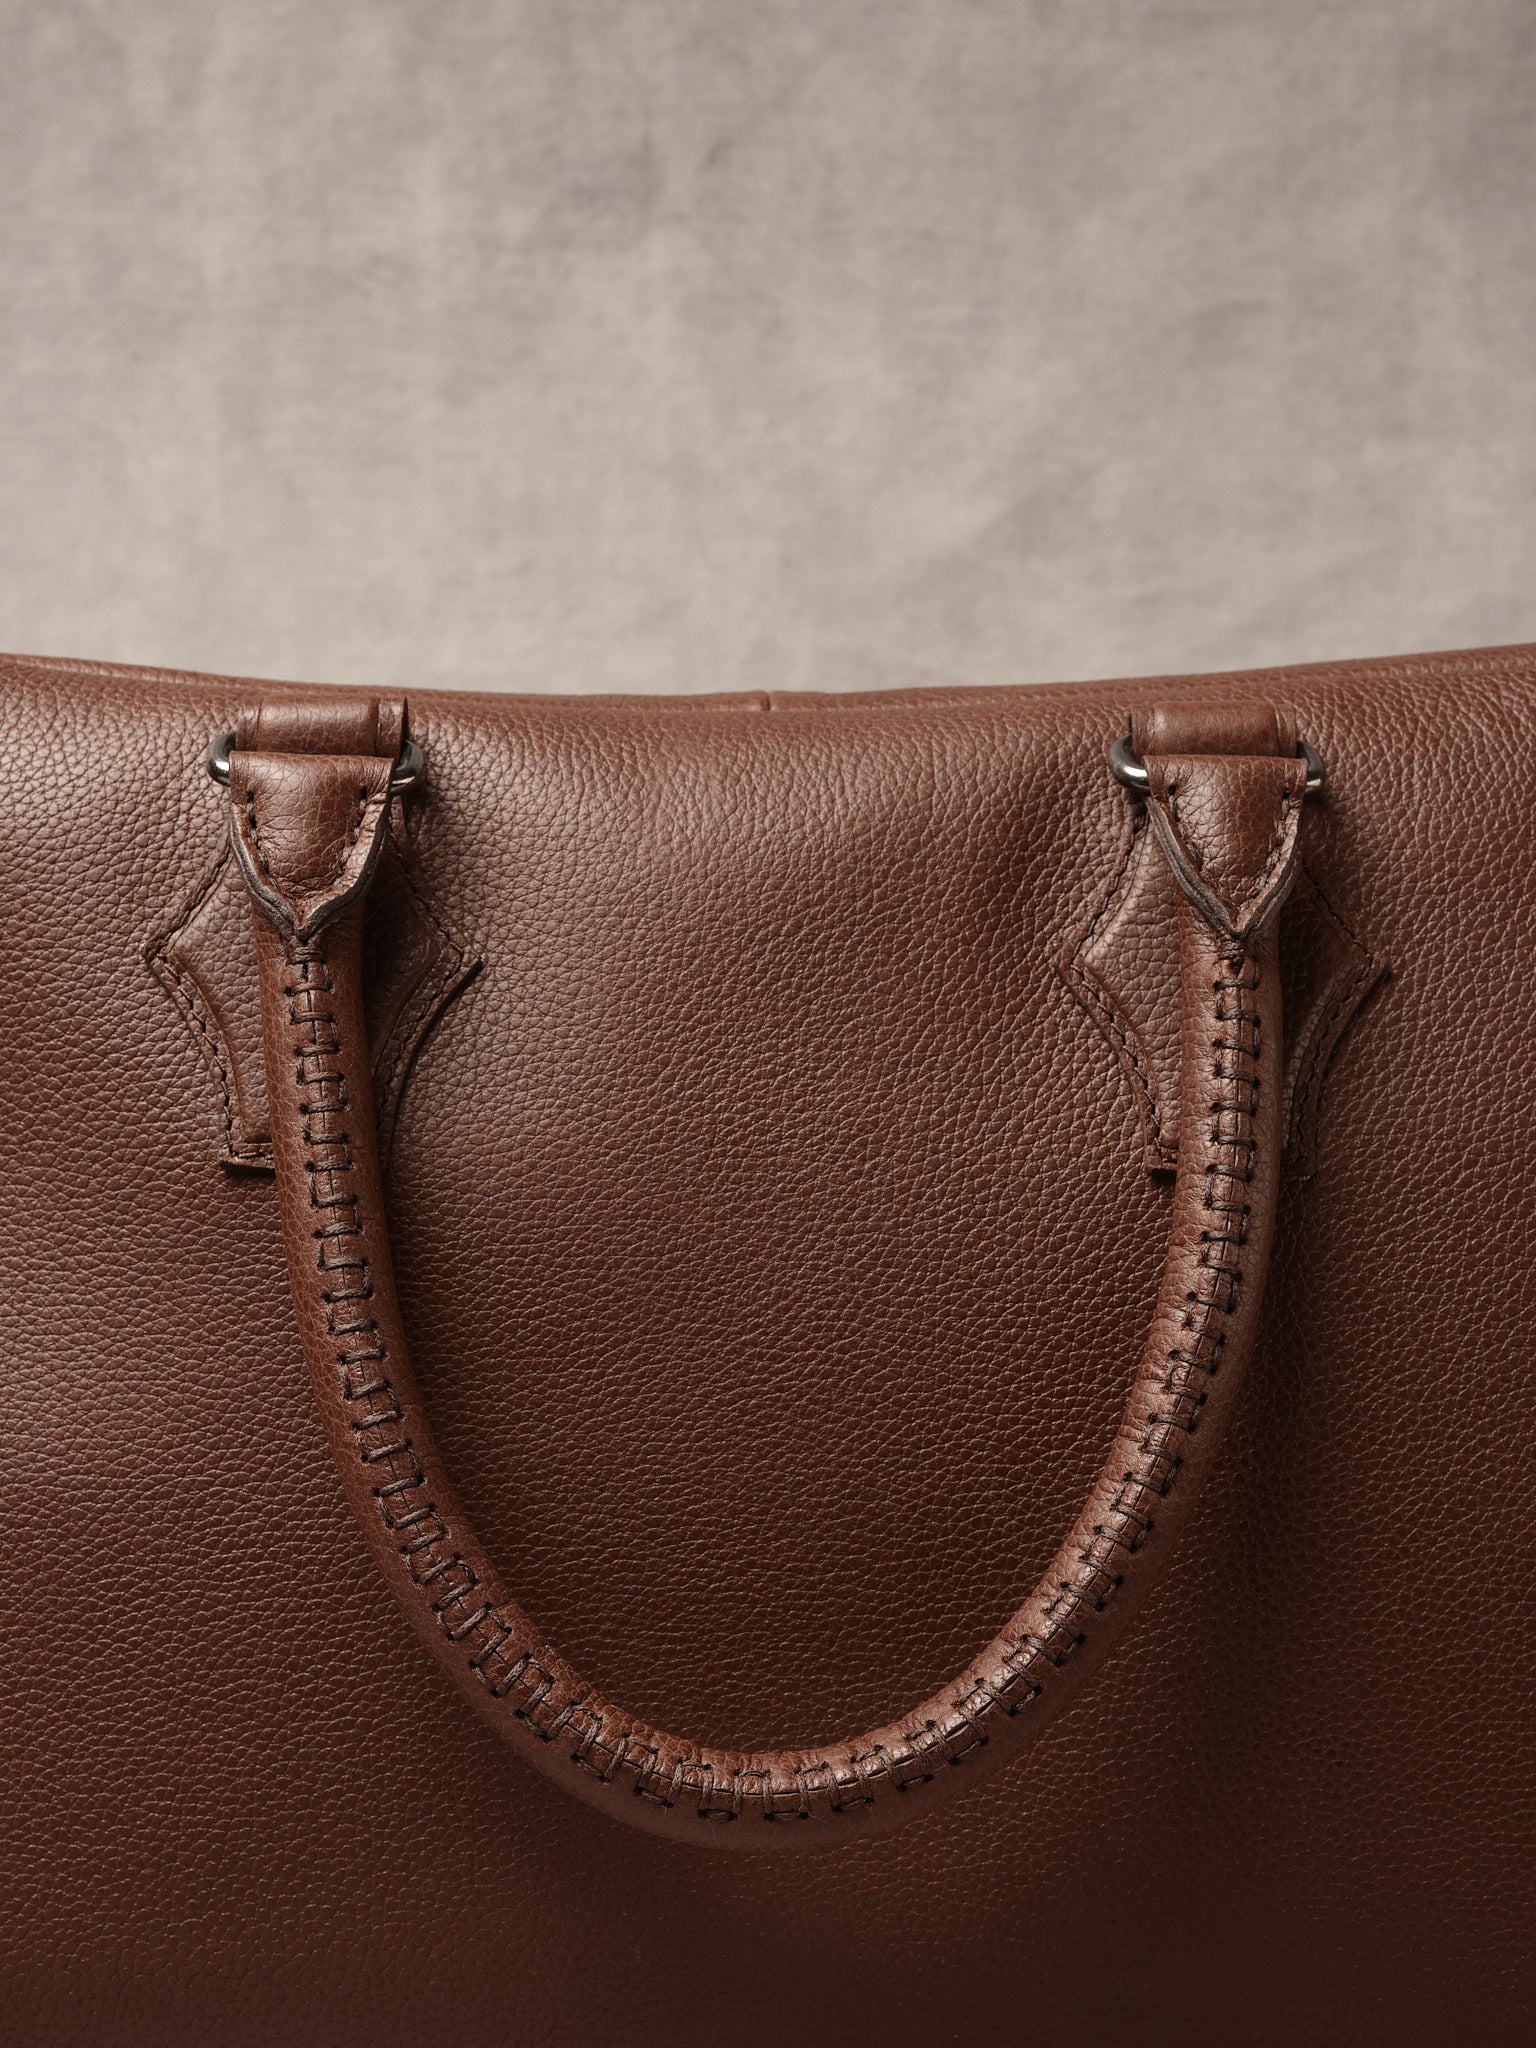 Hand-stitched Handles. Large Travel Duffle Bag Brown by Capra Leather